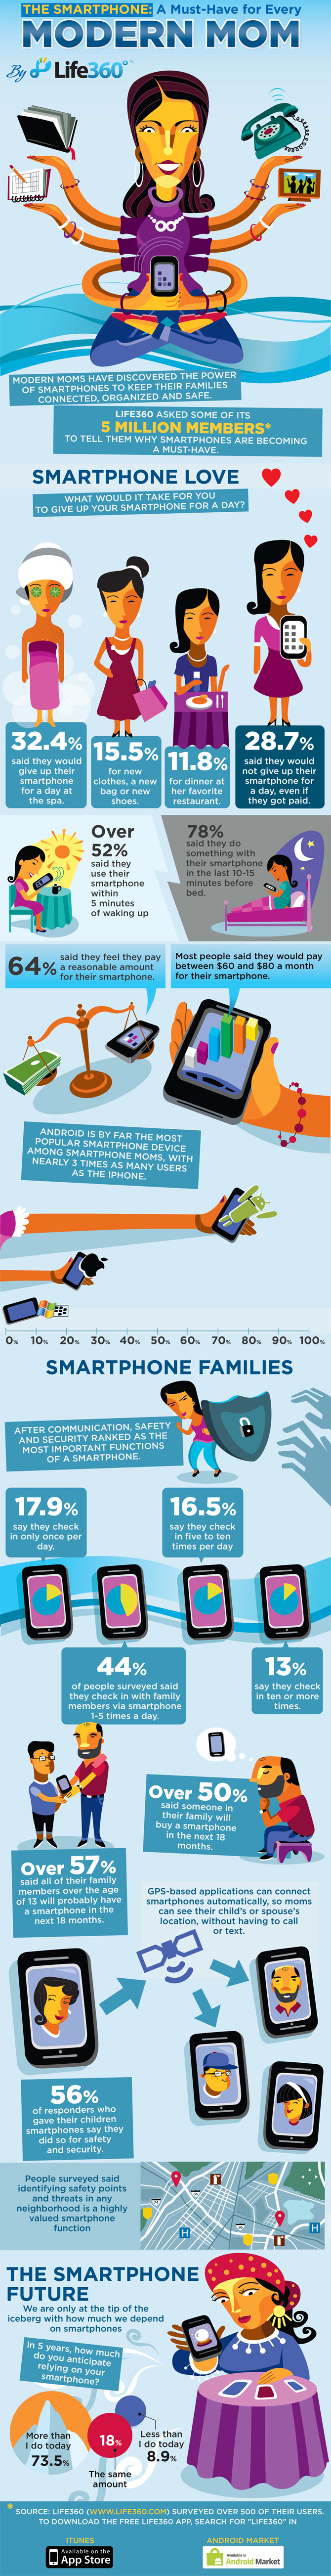 The Smartphone: A Must-Have For Modern Moms